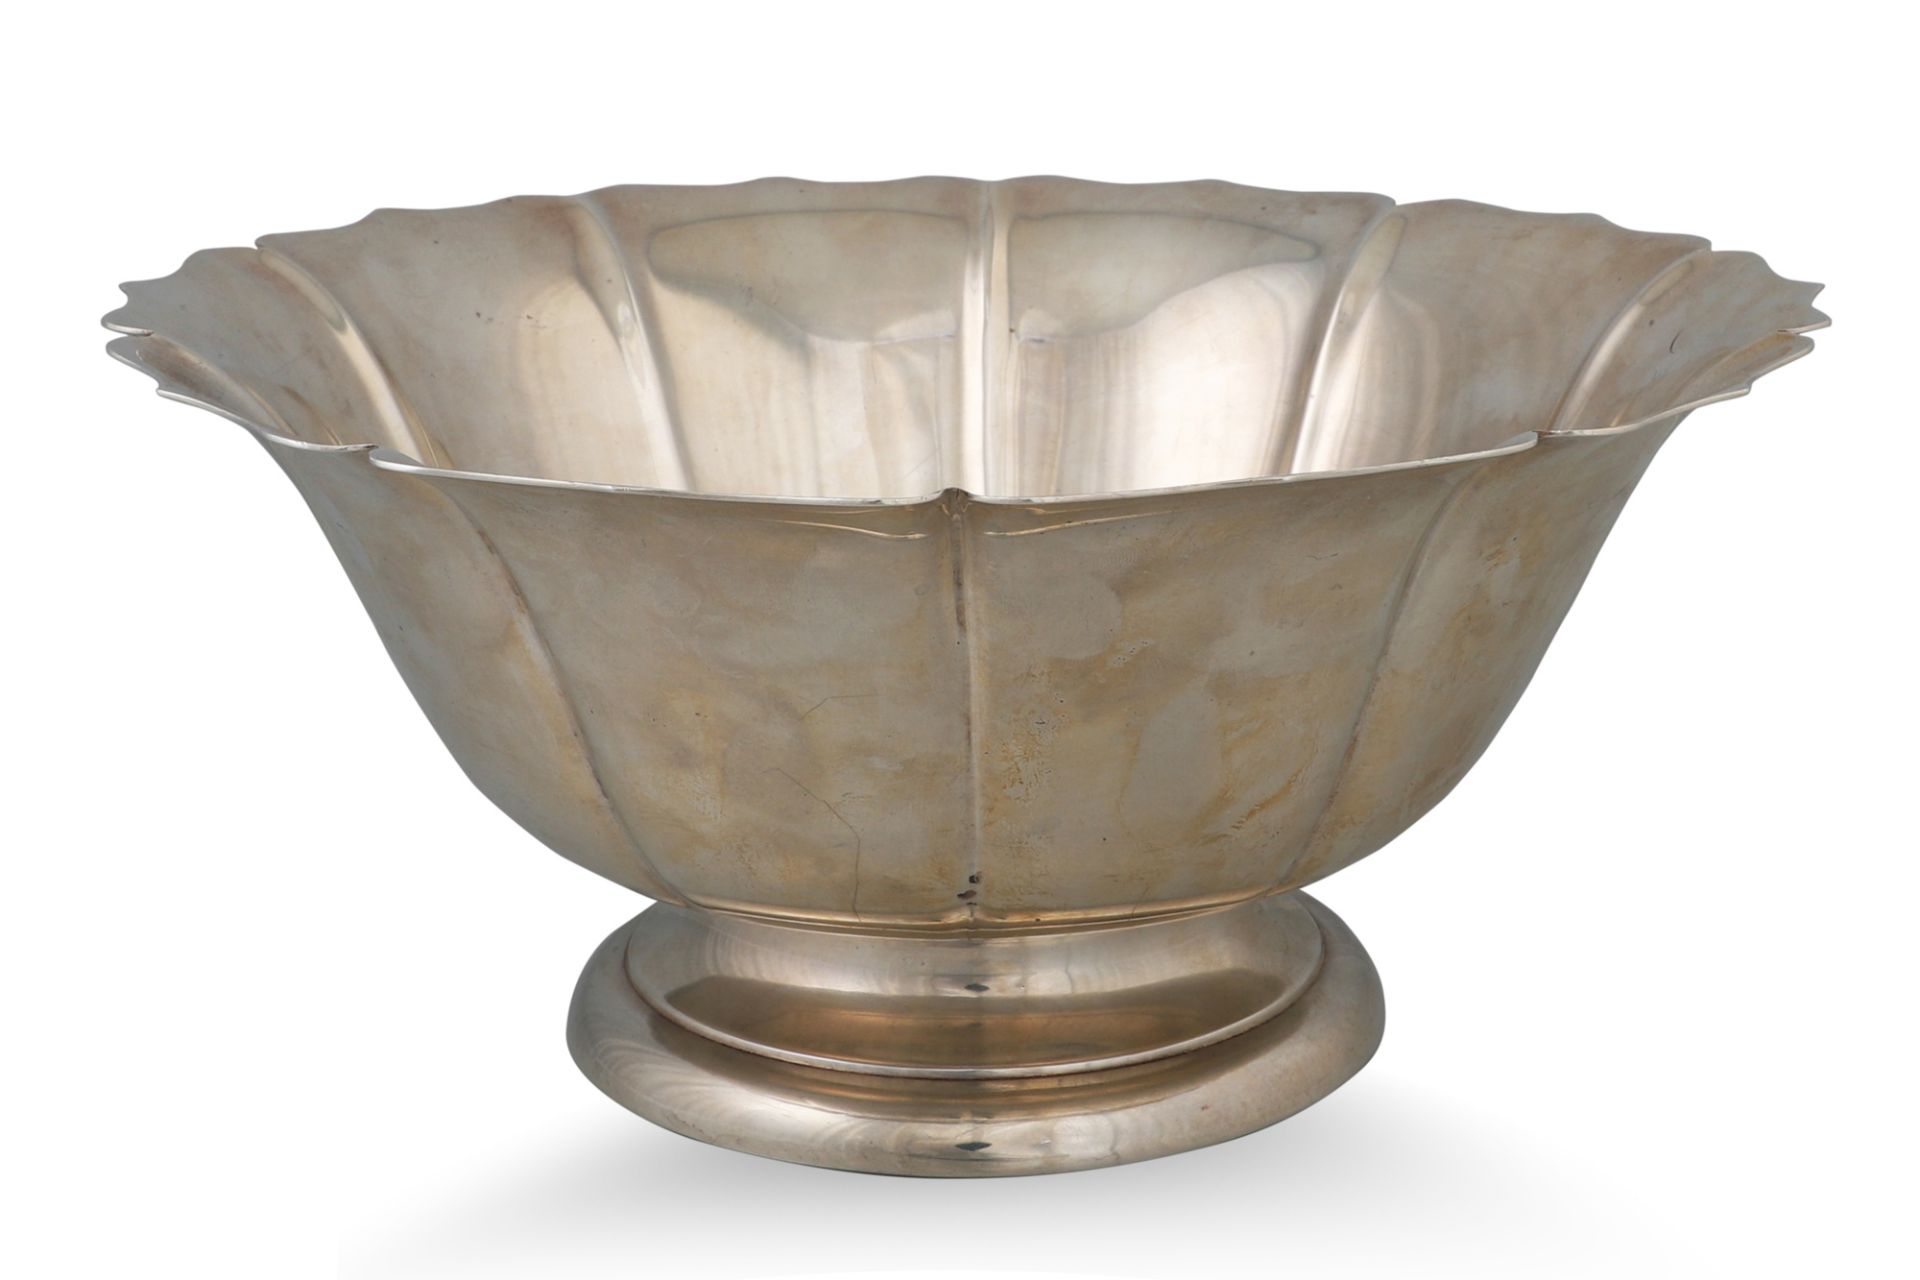 AN EARLY 20TH CENTURY USA STERLING SILVER IRISH “REPRODUCTION” SILVER BOWL, of shaped form, by